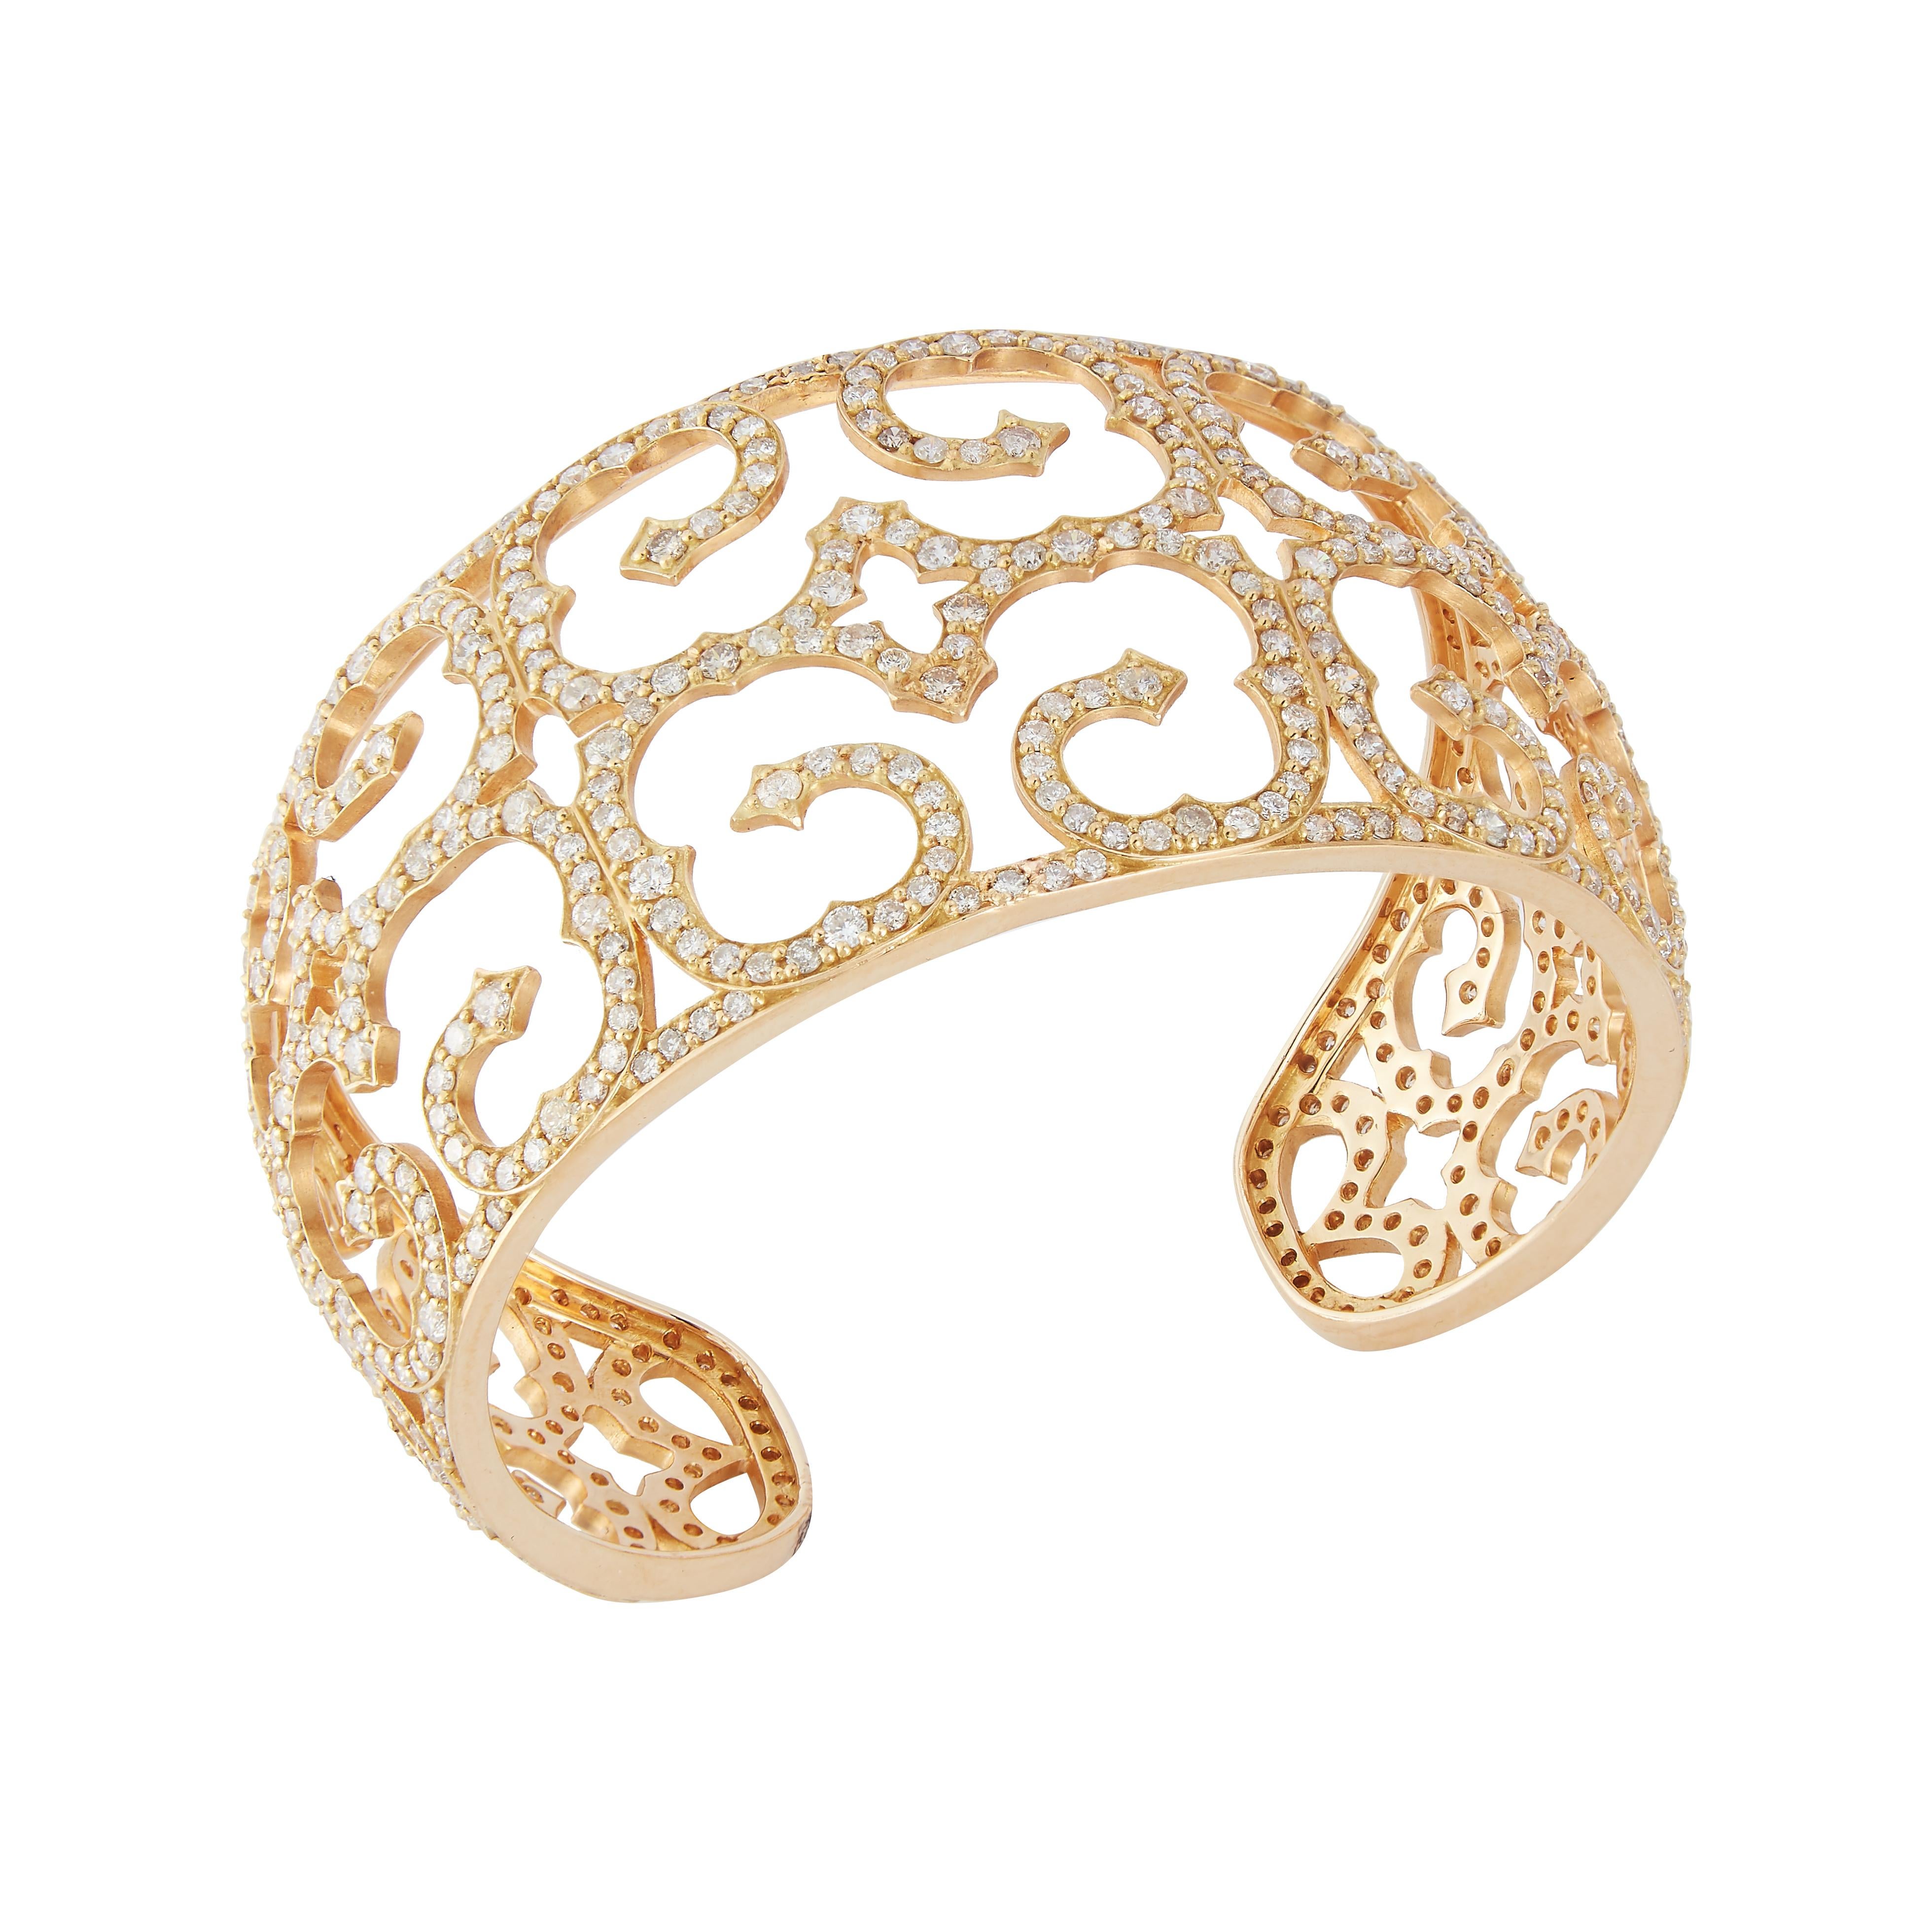 Parulina Couture Fine Jewelry - A dazzling cuff in 18K Yellow Gold with 10.97ct of diamonds. 
Width: 1.5inch
Inside Diameter: 2.5in
Metal: 18K Yellow Gold
Diamond Carat Weight: 10.97